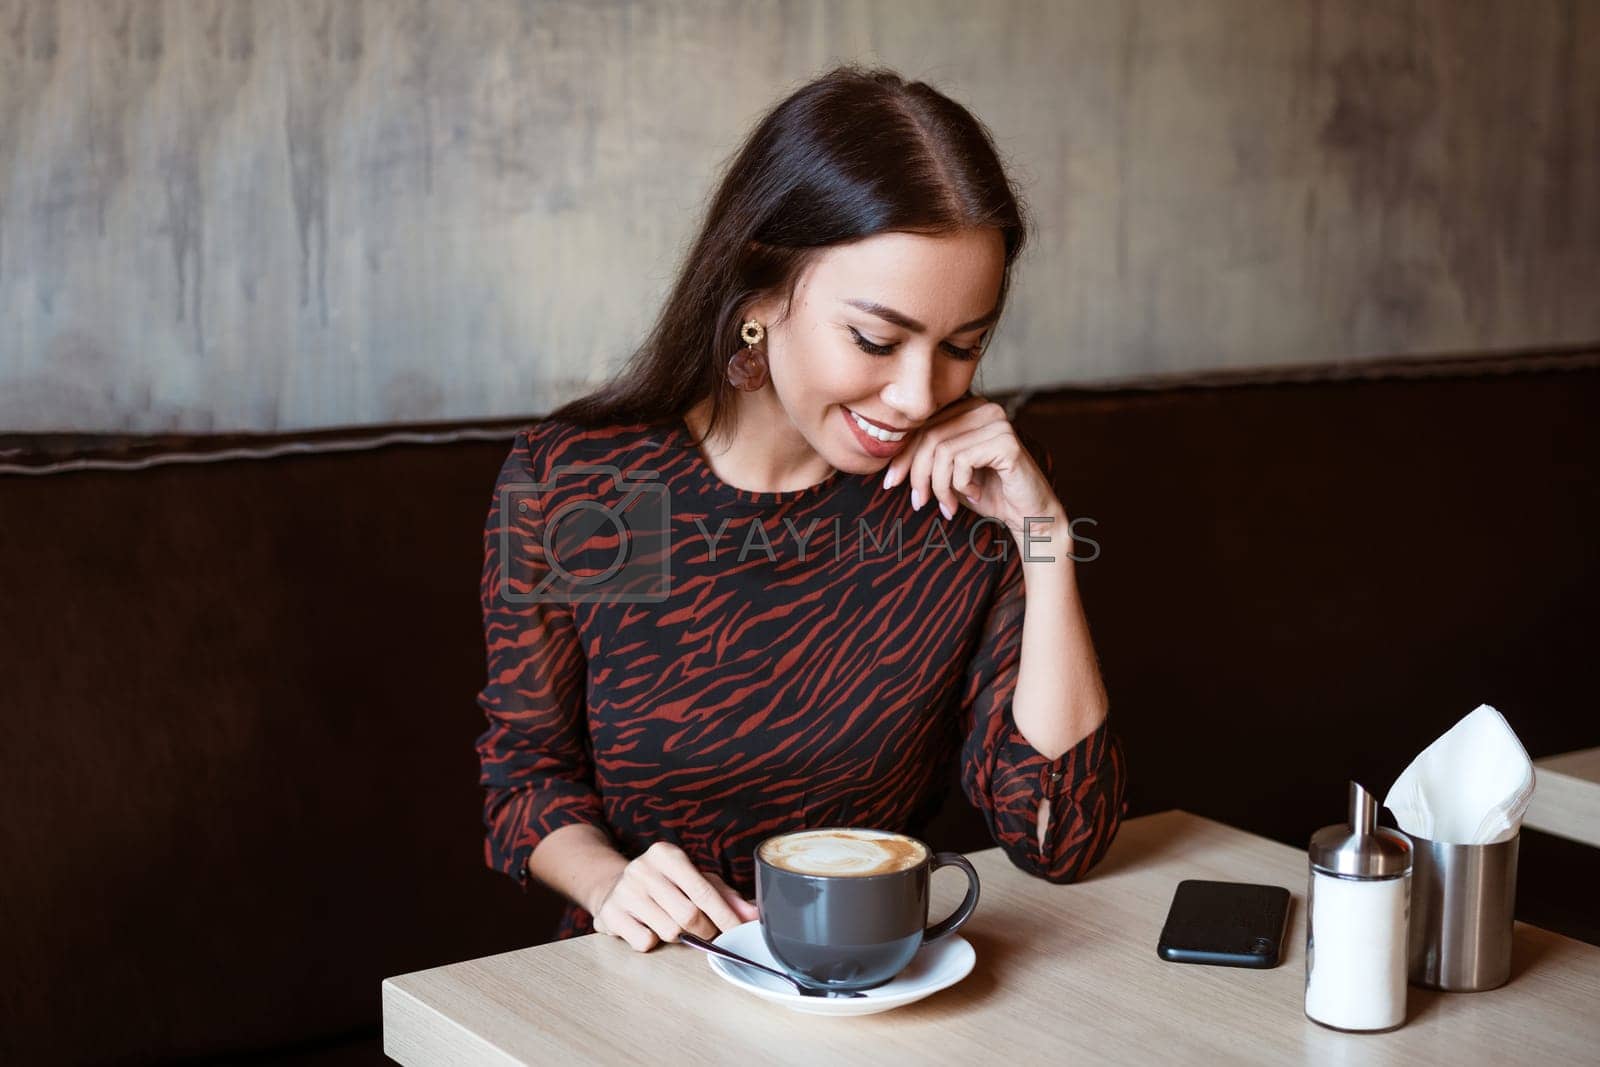 Royalty free image of Cheerful girl at a table in a cafe with a cup of coffee by EkaterinaPereslavtseva